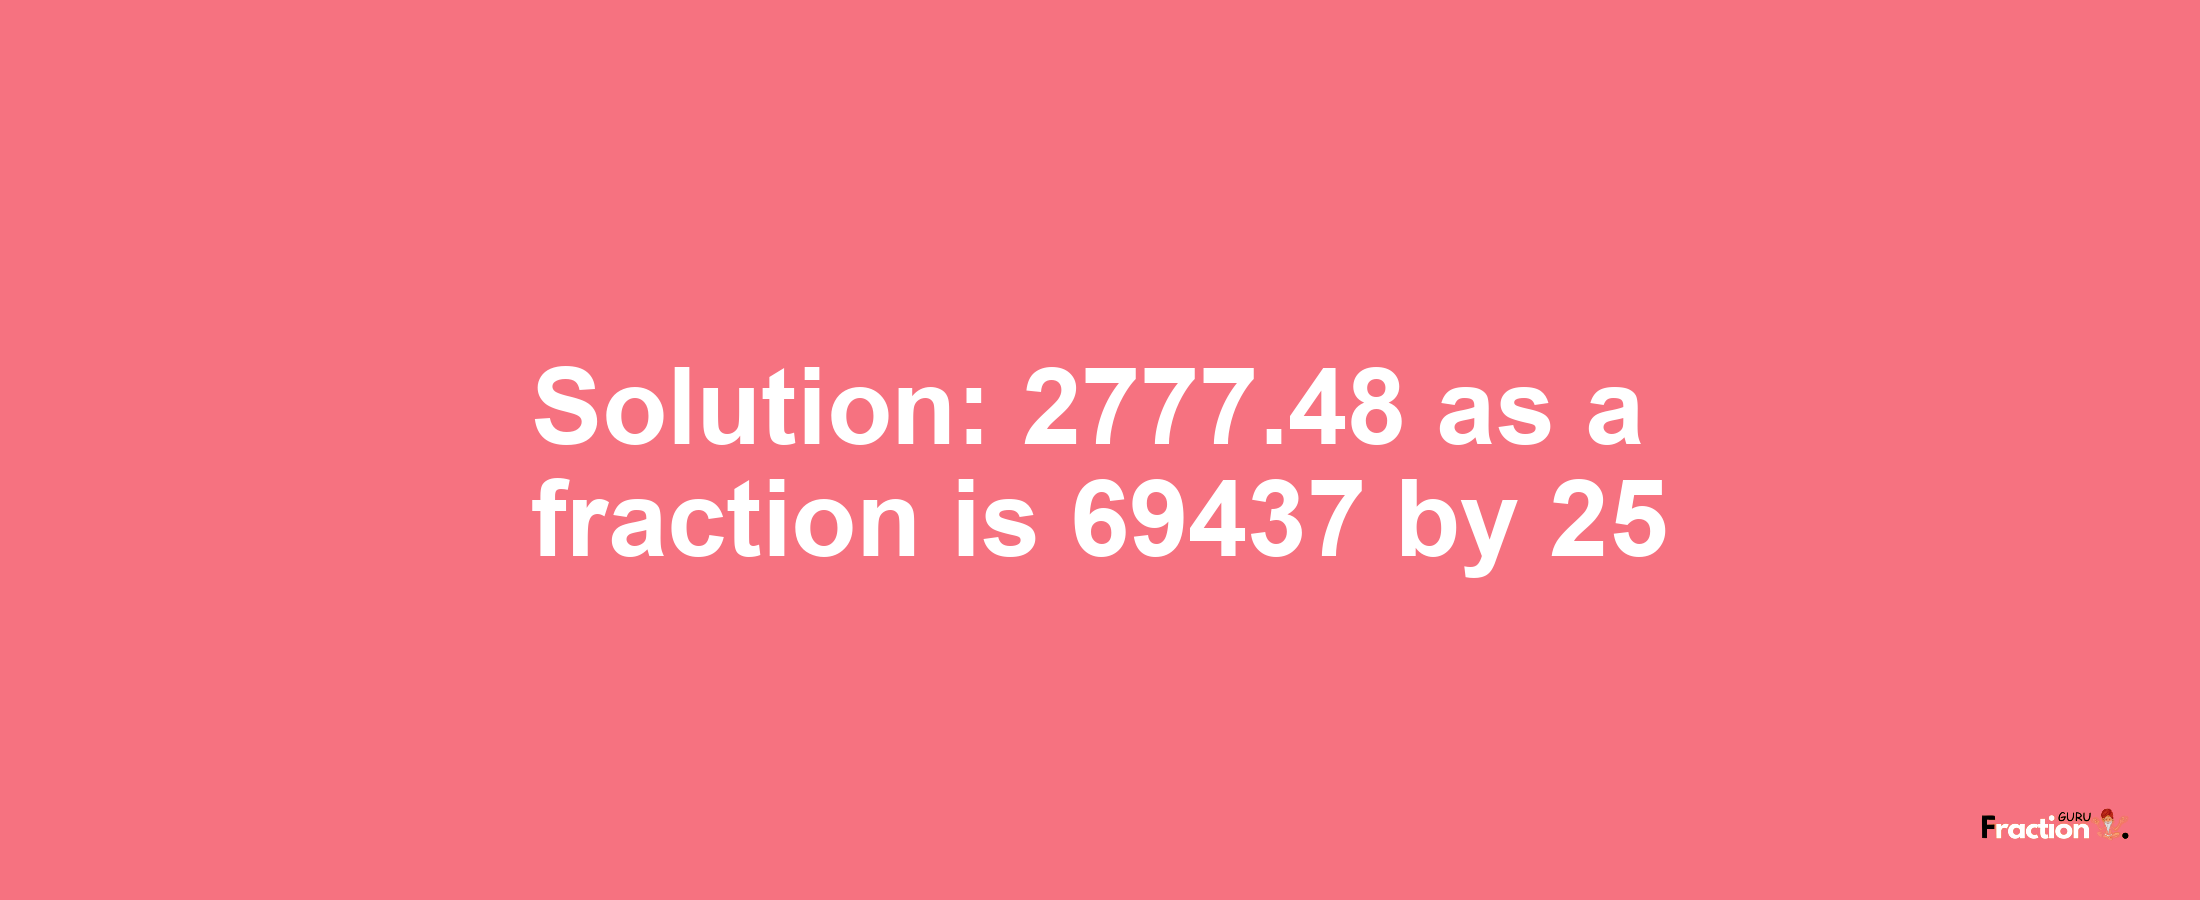 Solution:2777.48 as a fraction is 69437/25